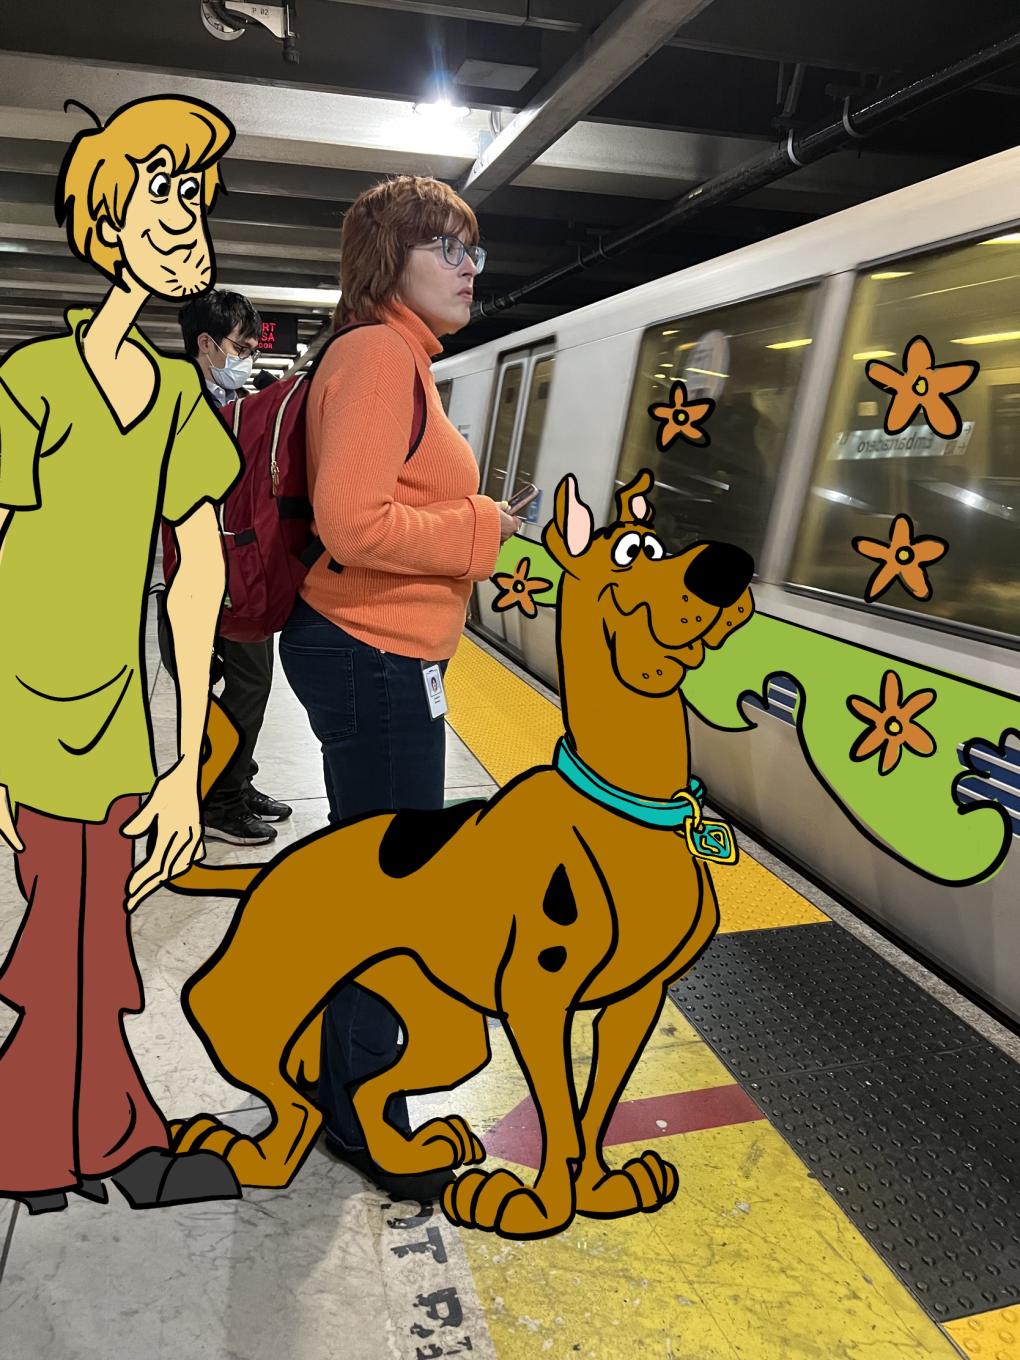 An illustration of Scooby Doo and Shaggy over a photo of a woman waiting for BART